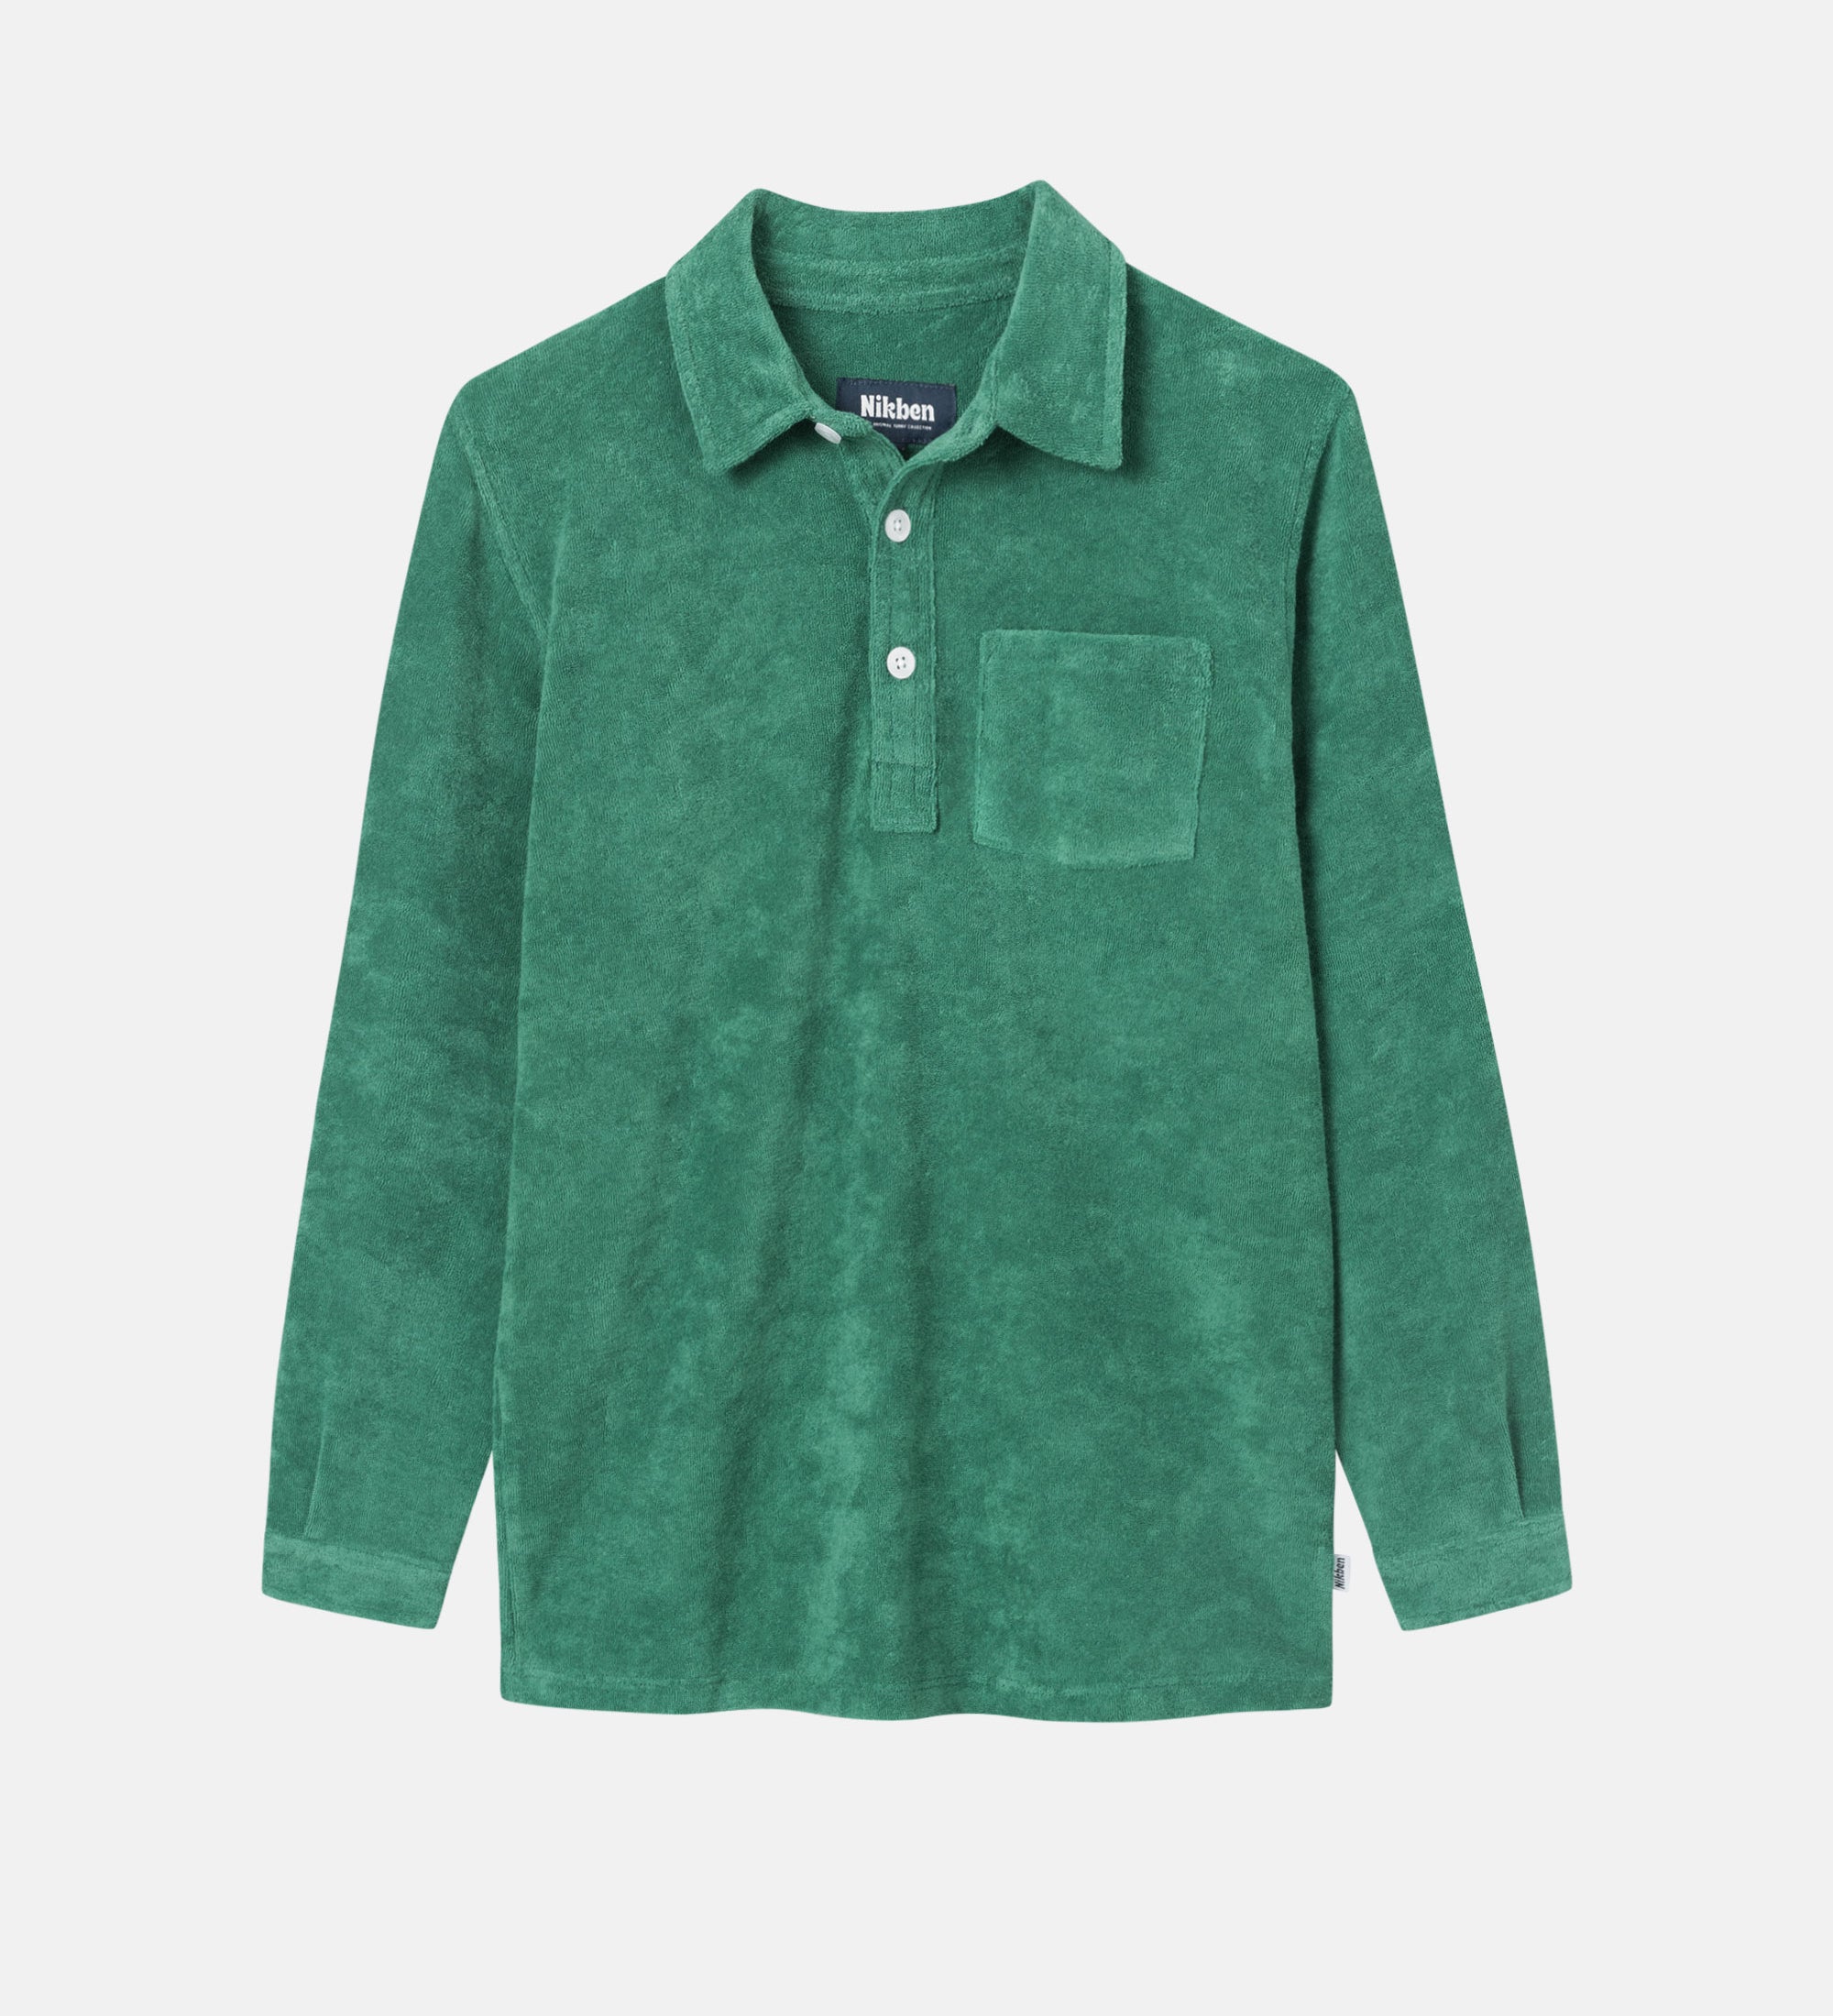 Green long sleeve shirt in terry toweling fabric for kids with half button closure and one chest pocket